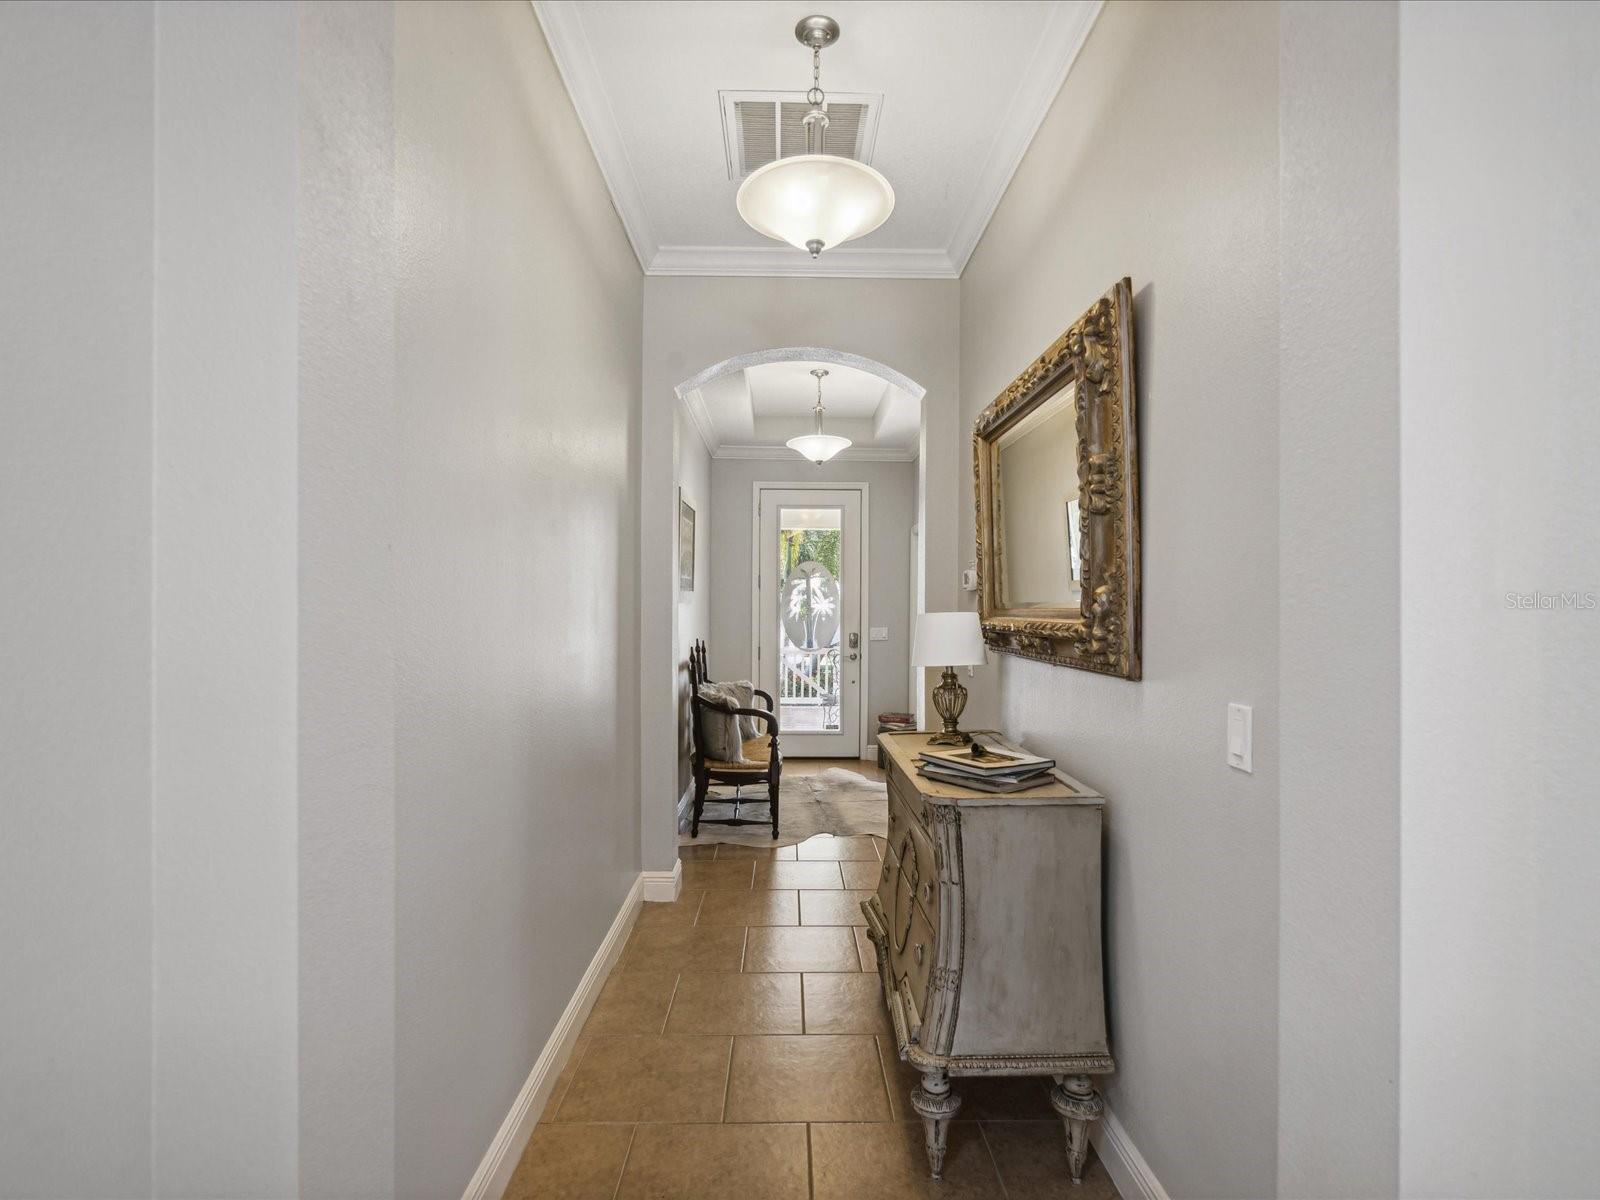 The archway separates the front bedrooms from the rest of the hallway leading to the great room/kitchen and dining area.